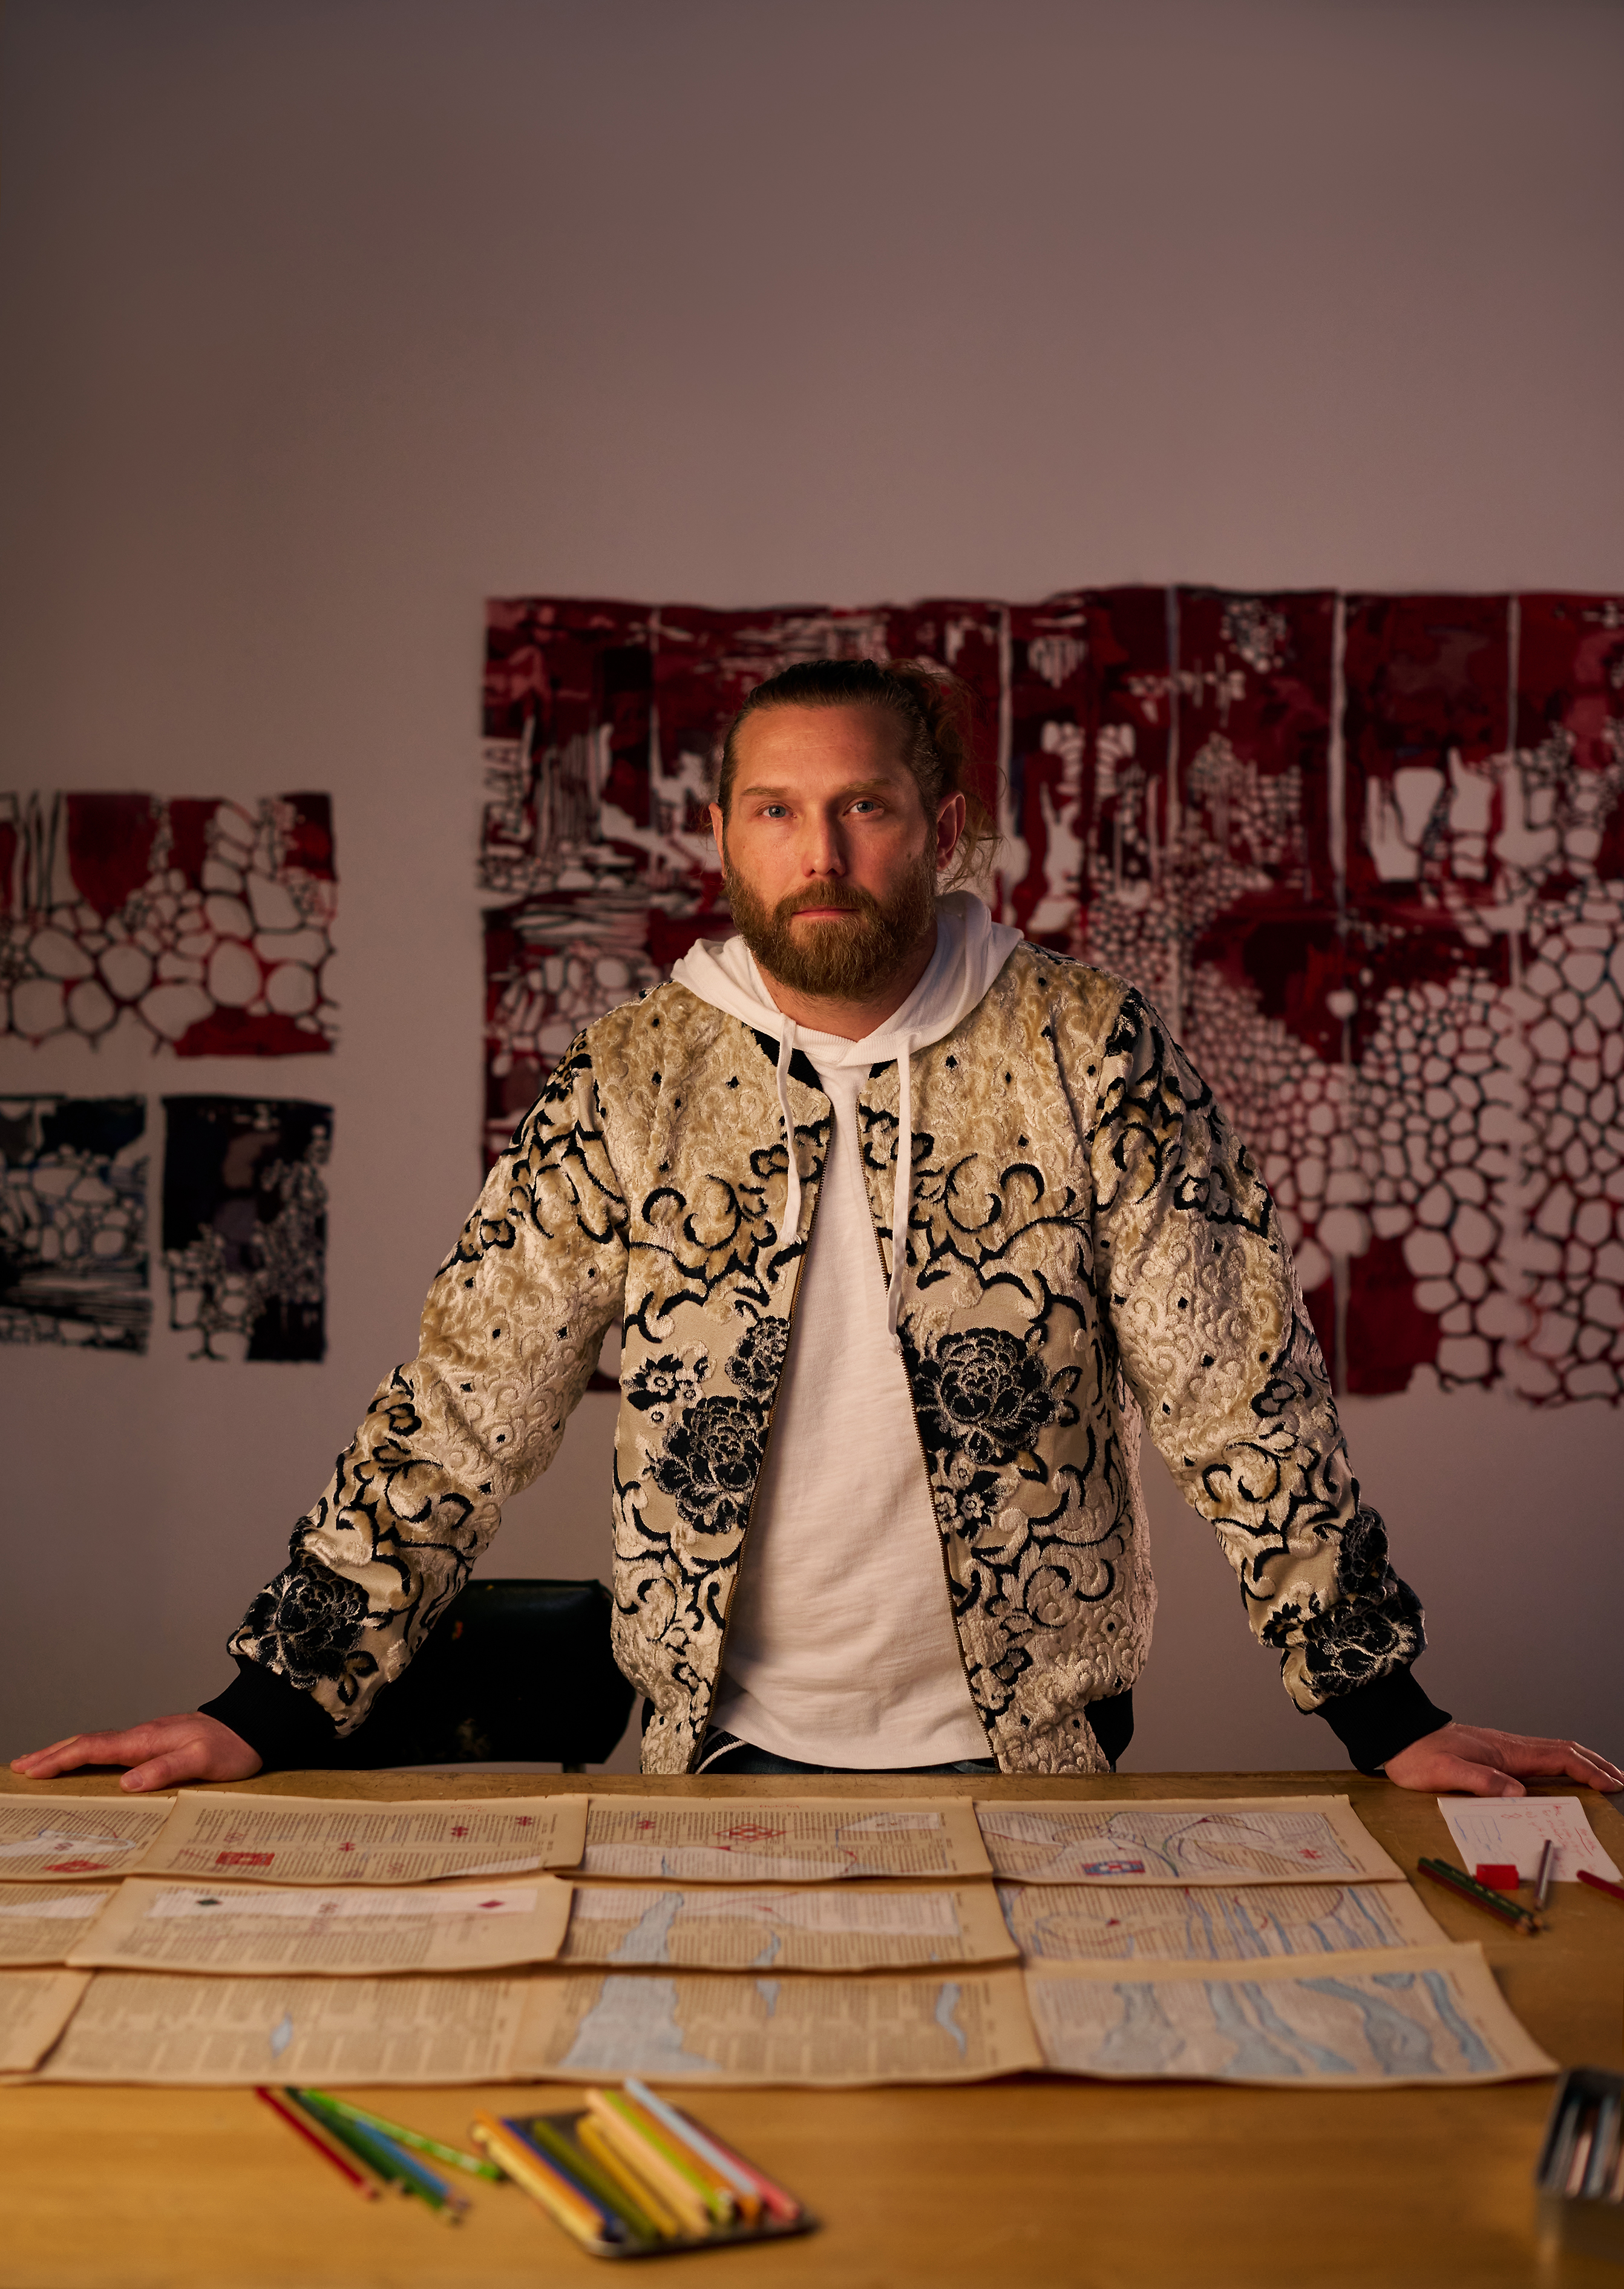 Man wearing a patterned jacket stands at a table with drawings laying out on the surface in front of him.